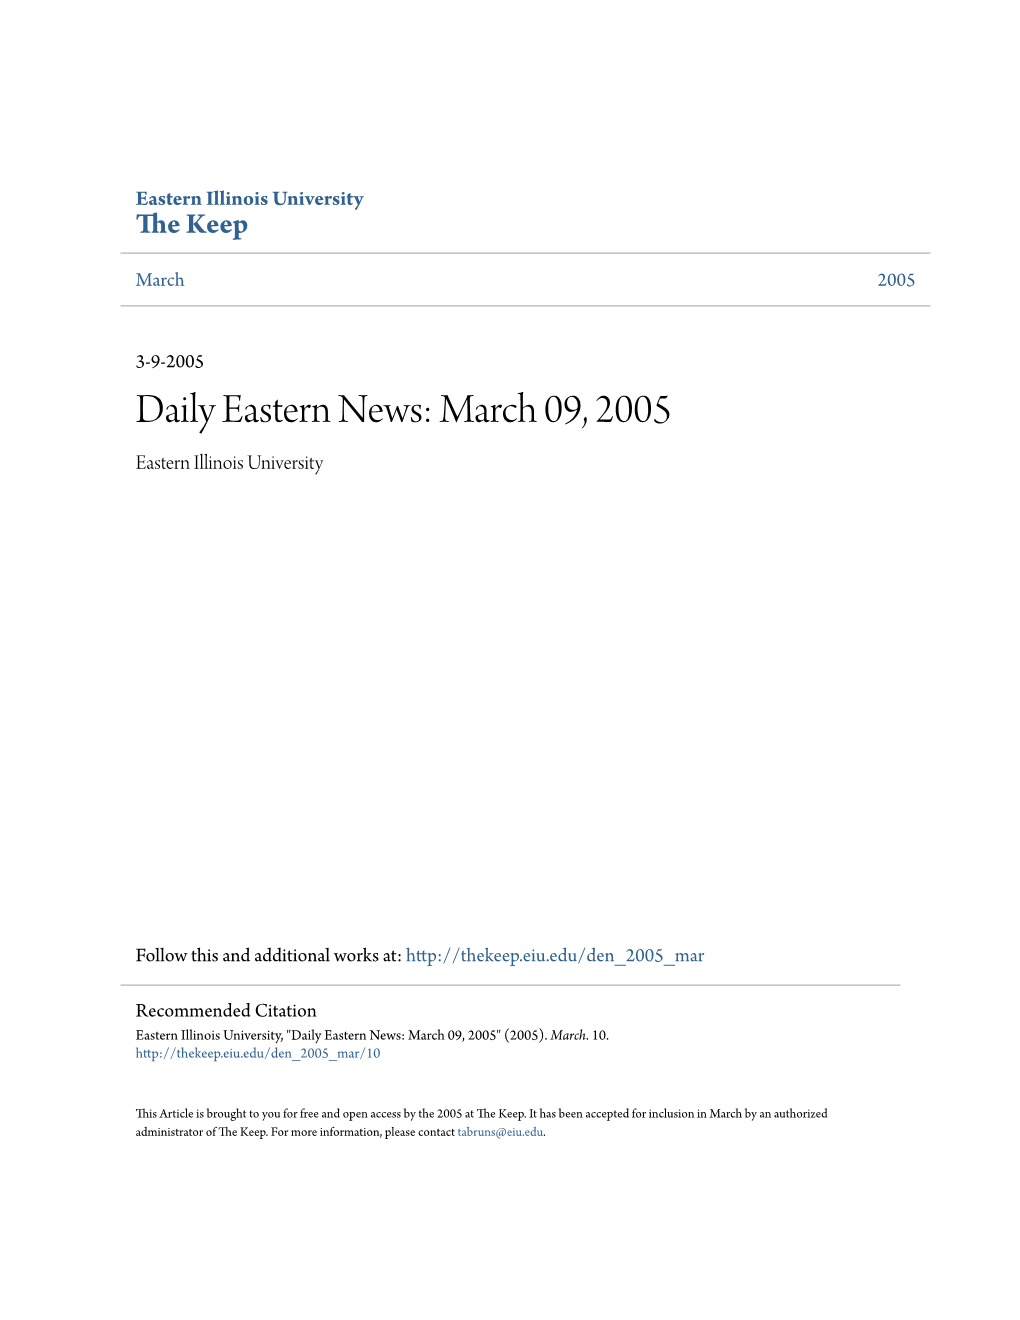 Daily Eastern News: March 09, 2005 Eastern Illinois University